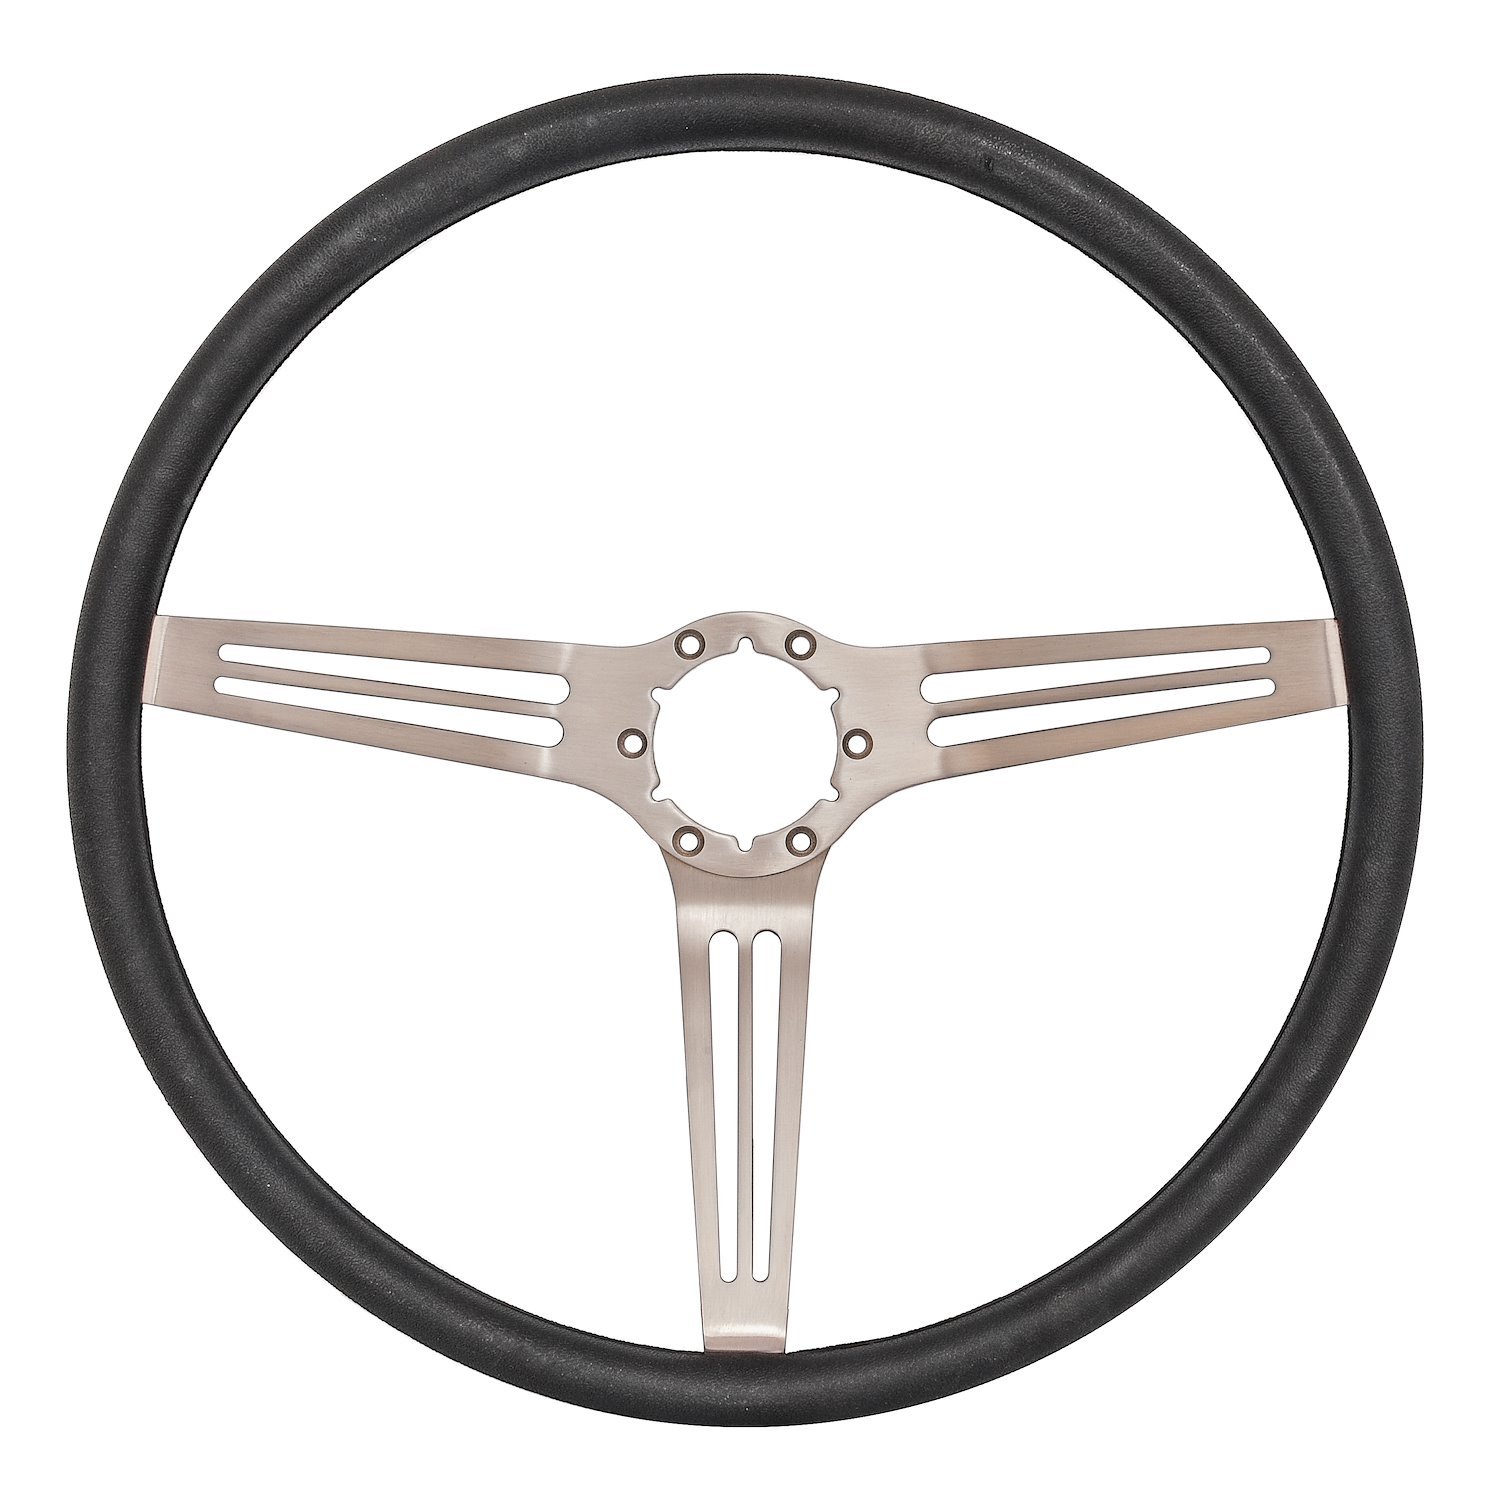 3-Spoke Comfort Grip Steering Wheel w/Banjo Spokes Fits Select 1960-1975 Chevy and GMC Trucks and 1969-1972 GM Cars [Black Grip]